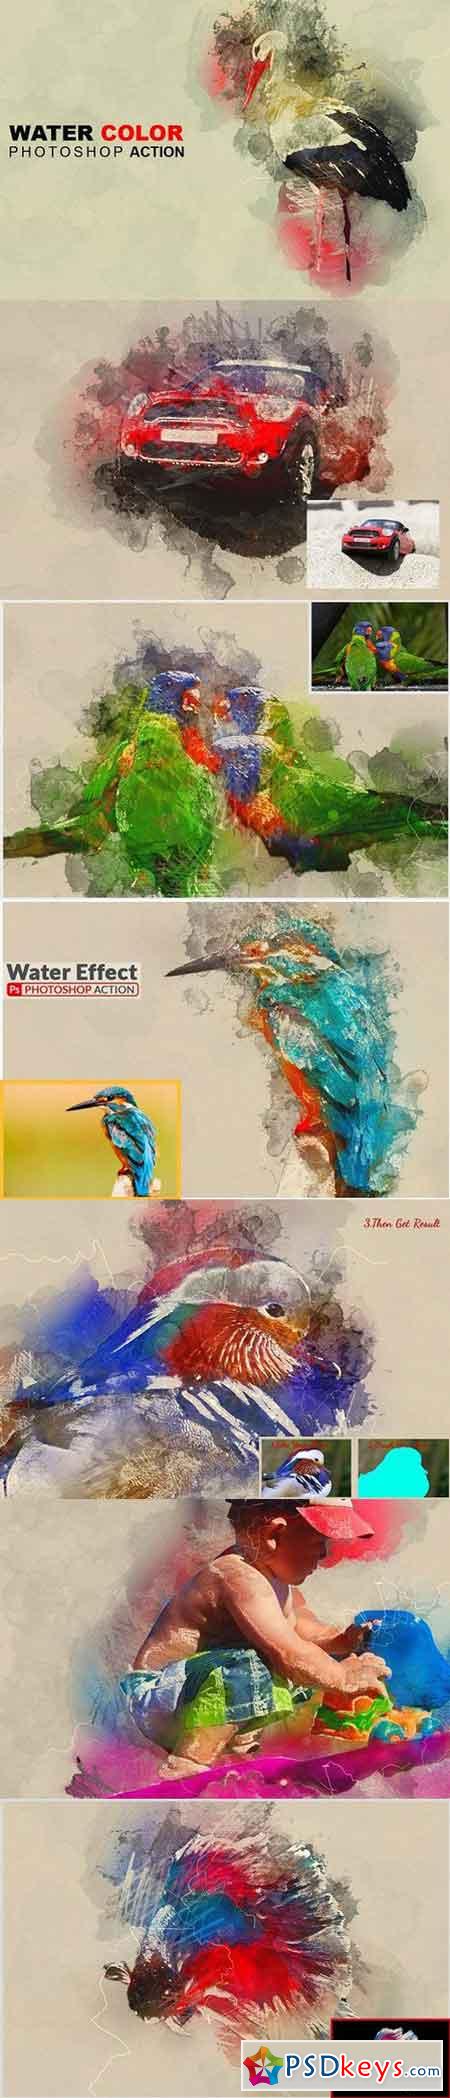 Water Color Photoshop Action 1573158